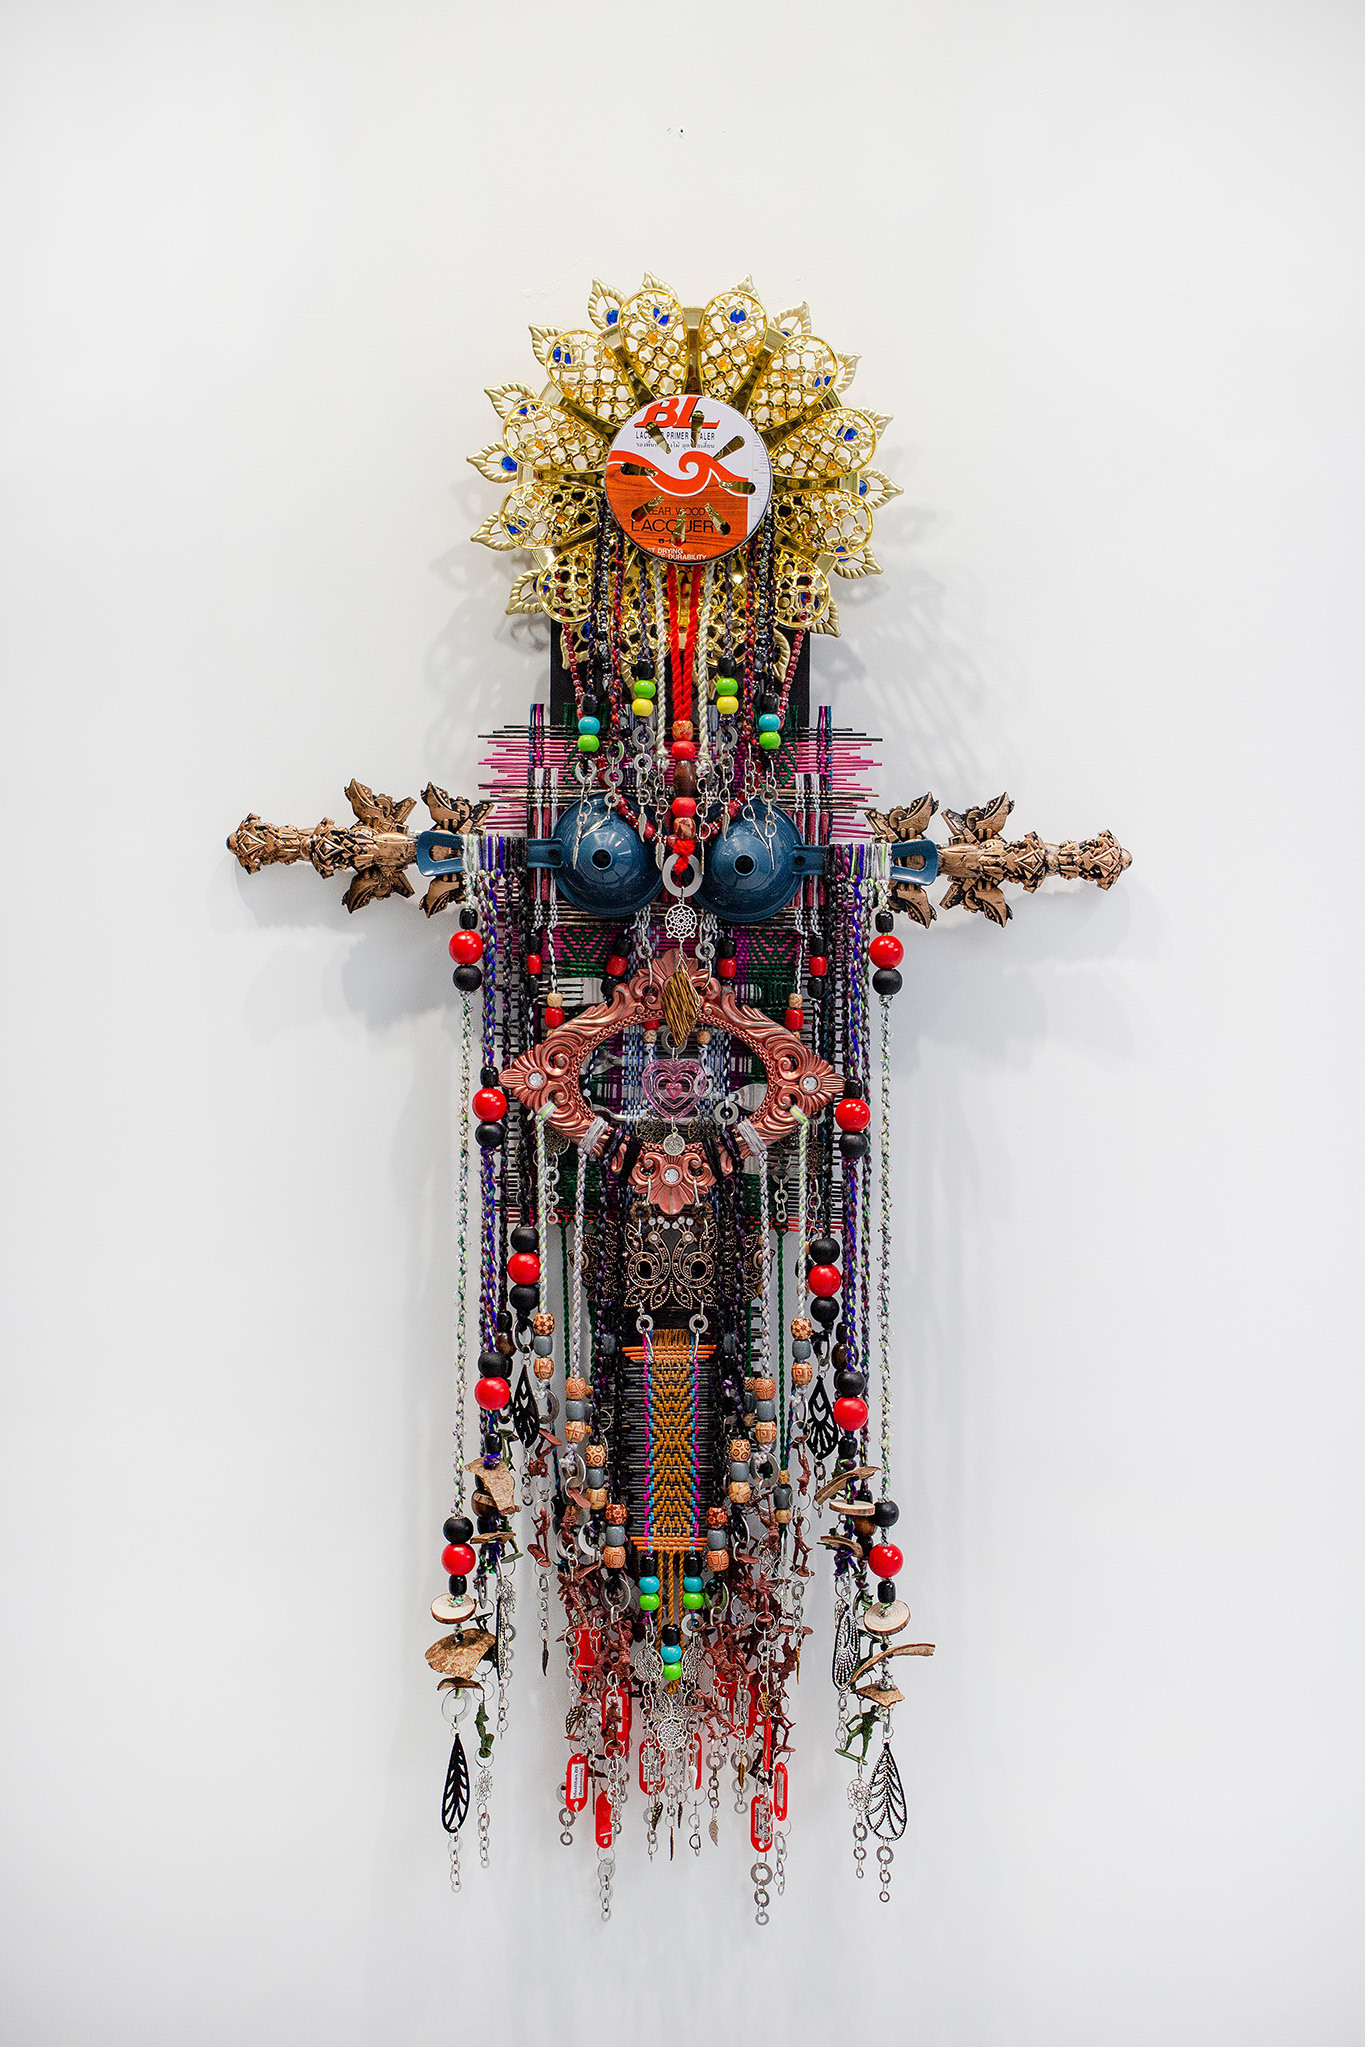 Anne Samat, Daughter (weave through eternity) #2, 2022, Rattan sticks, kitchen and garden utensils, beads, ceramic, metal and plastic ornaments, 114 x 71.1 x 10.2 cm, Courtesy of: the artist + Marc Straus New York